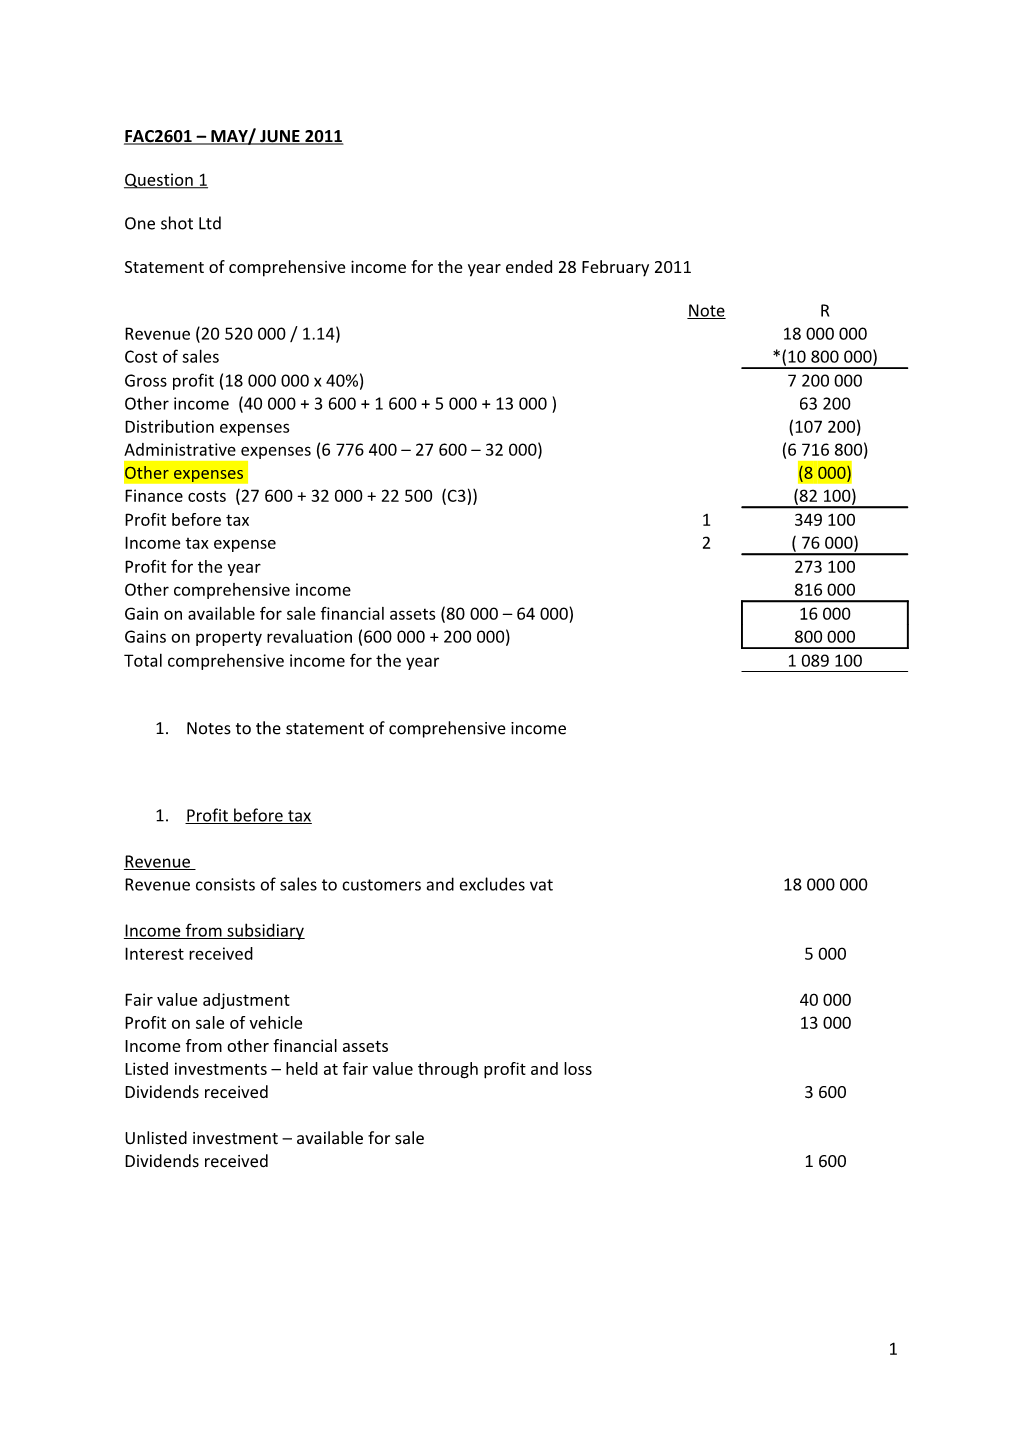 Statement of Comprehensive Income for the Year Ended 28 February 2011